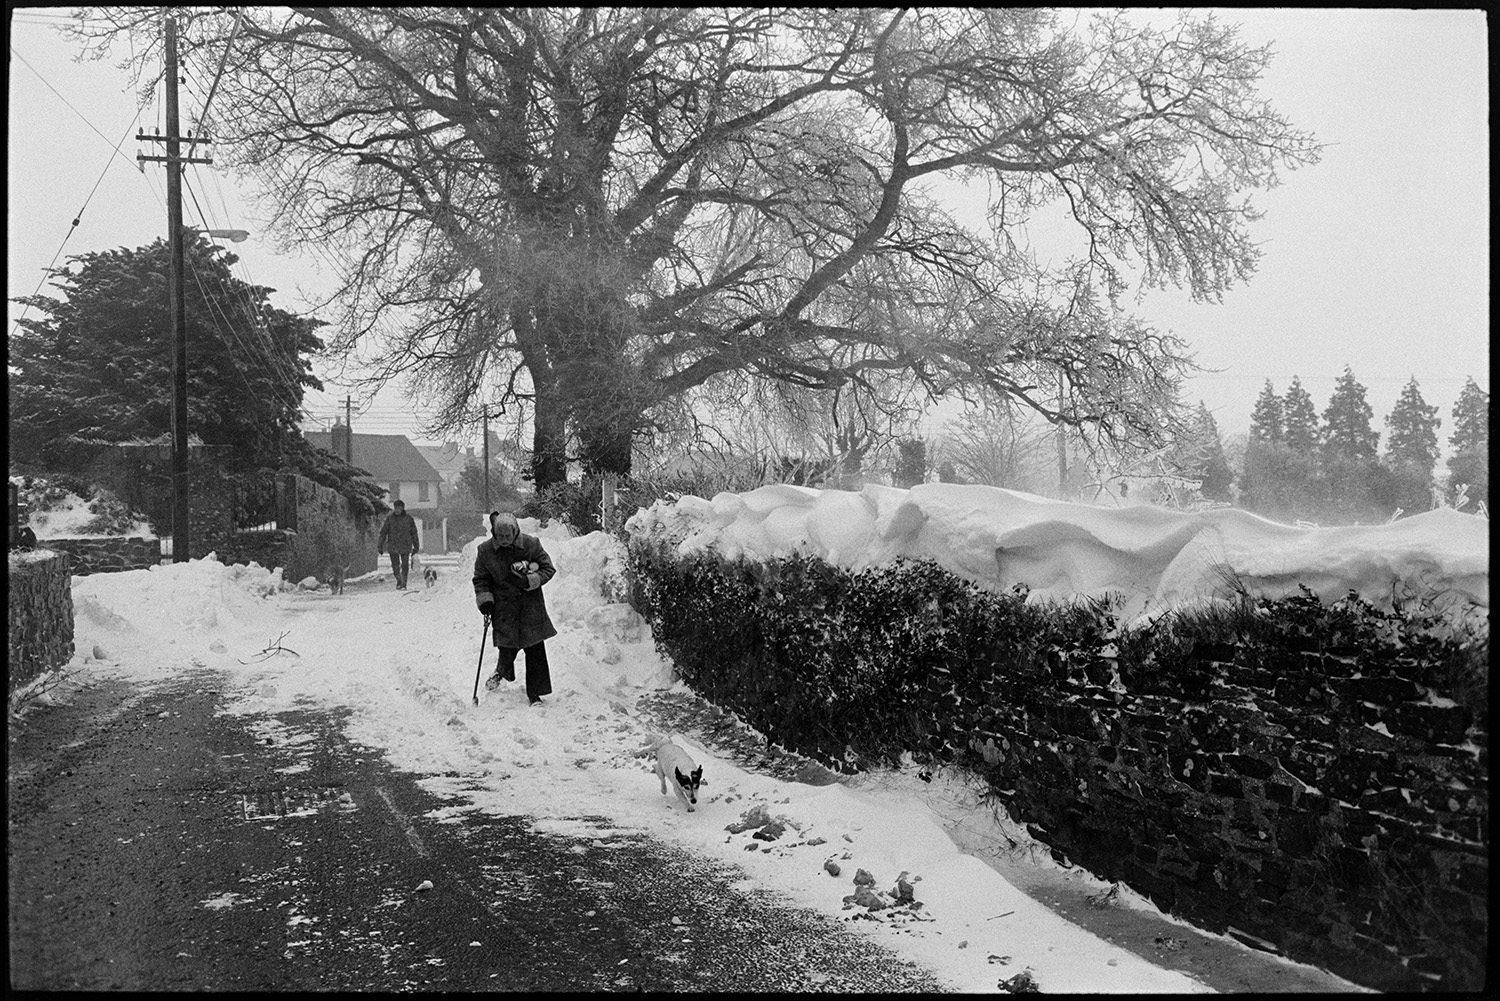 Snow, people struggling through blizzard in village. 
[Eve Lynch-Blosse walking through a snowy street in Dolton, carrying shopping. She is using a walking stick and a dog is with her. Another person walking a dog can be seen in the background. A snow drift against the wall of the street is also visible in the foreground.]